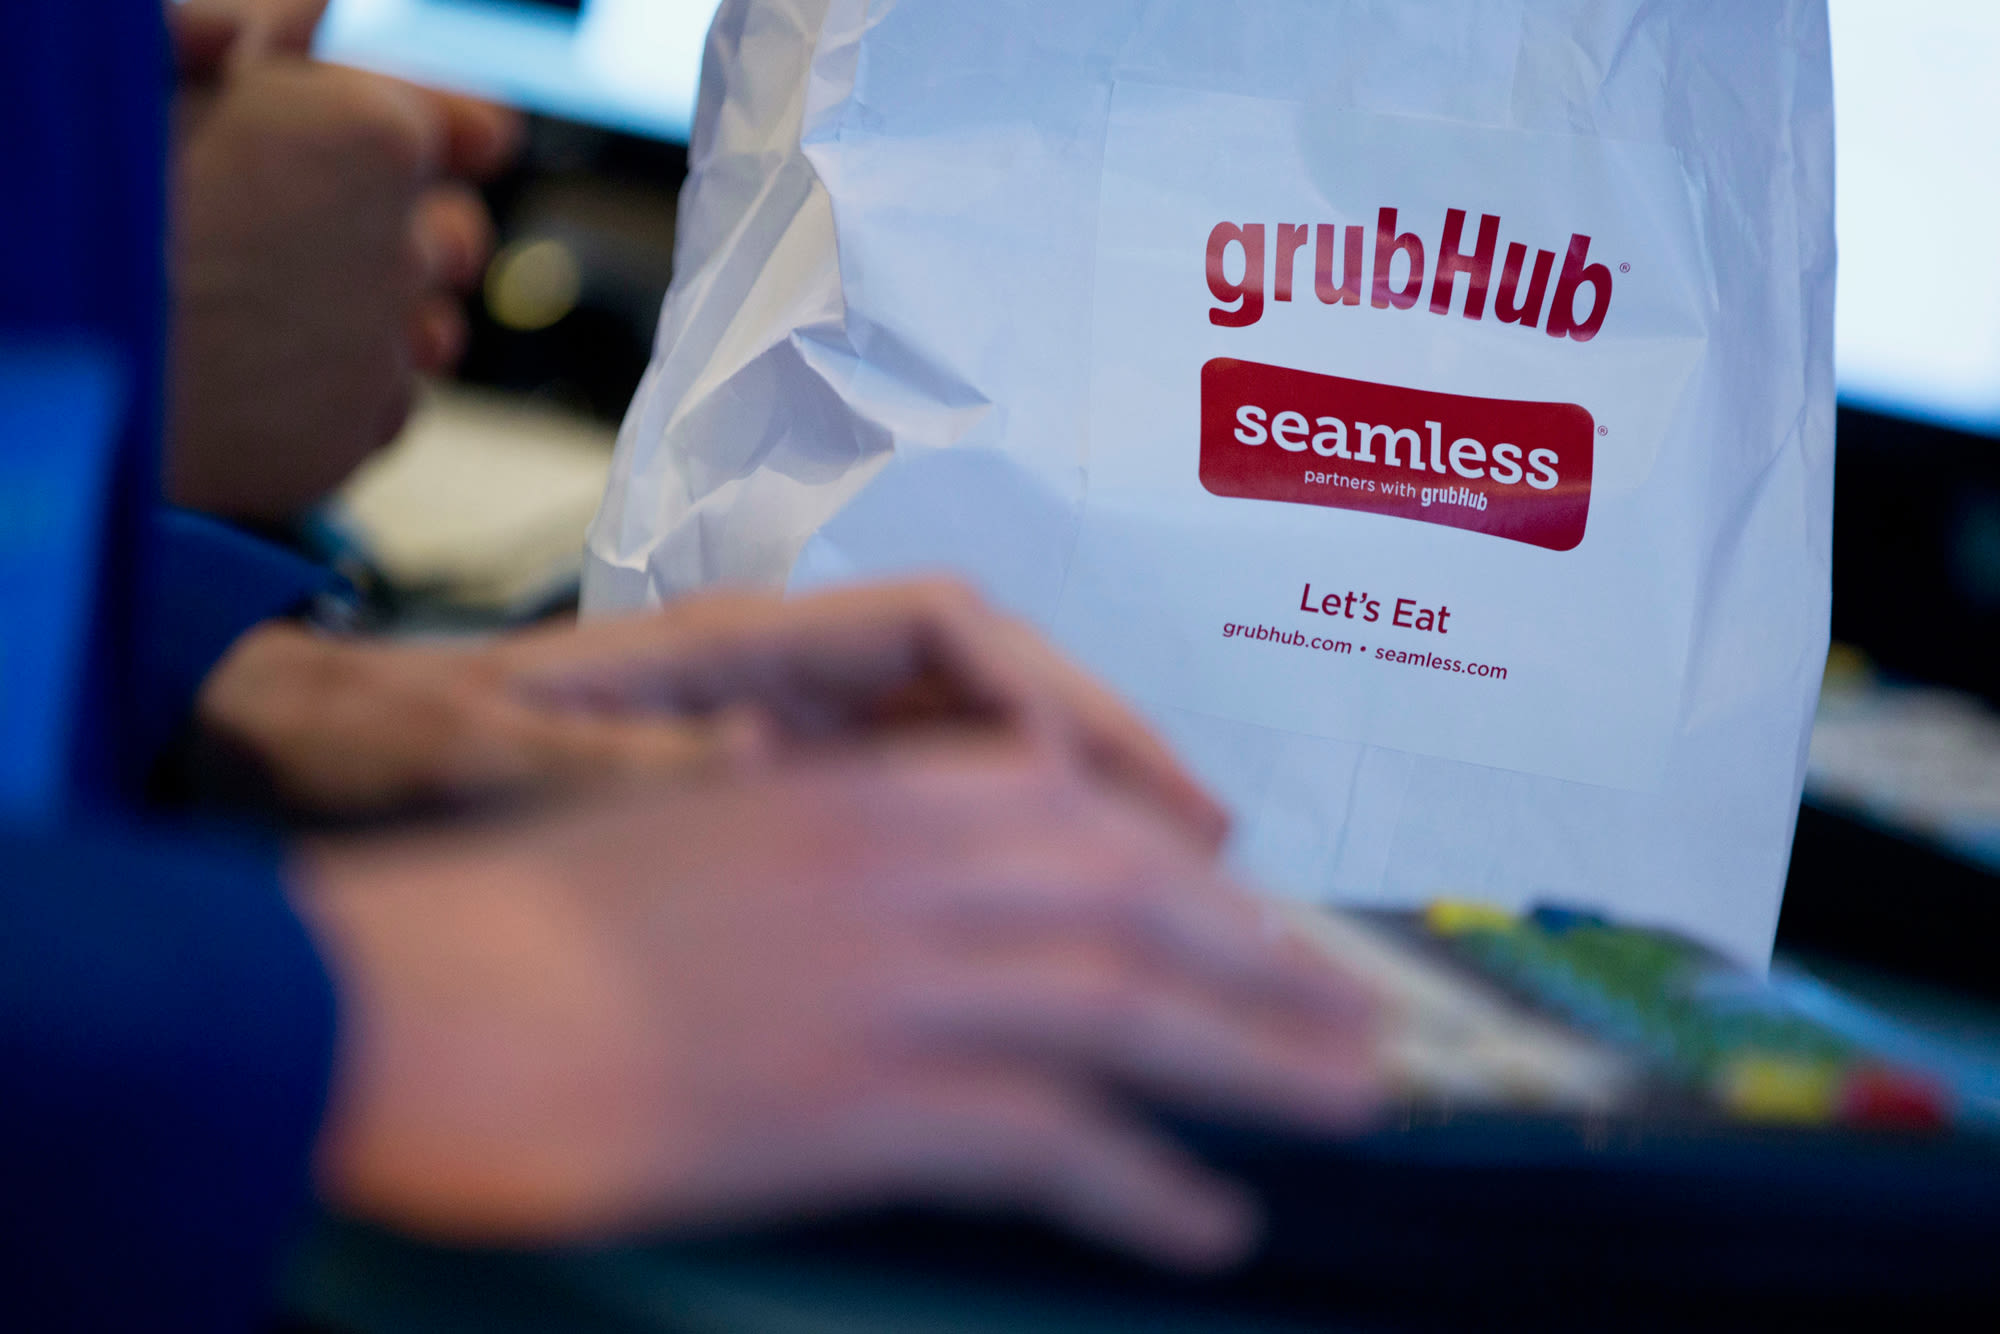 McDonald's adds GrubHub as its latest delivery partner